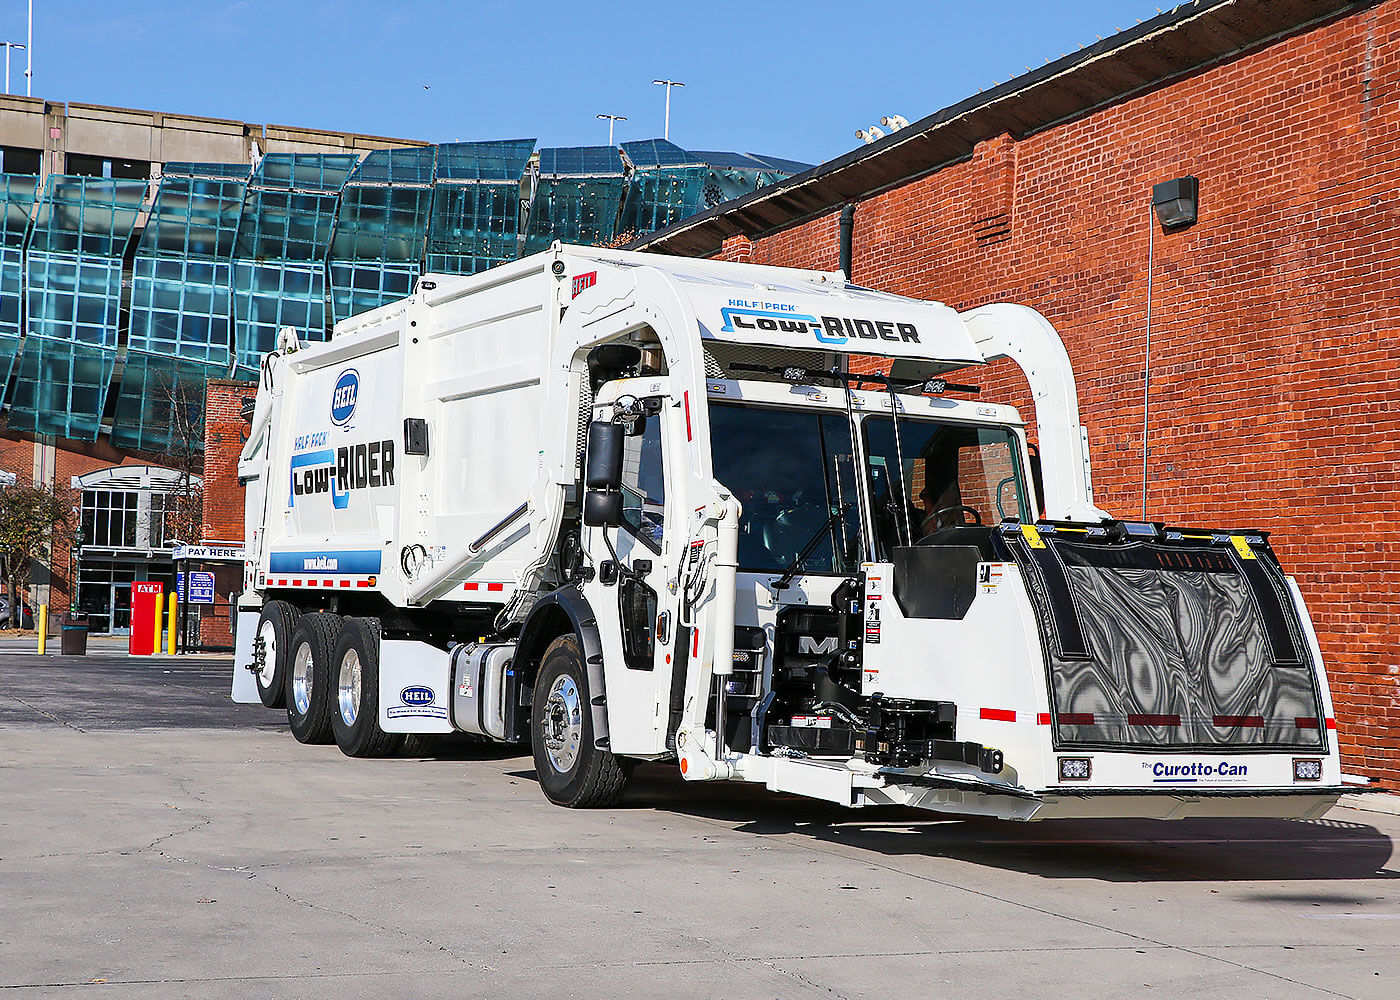 Low Rider frontload garbage trucks with low height for residential trash routes